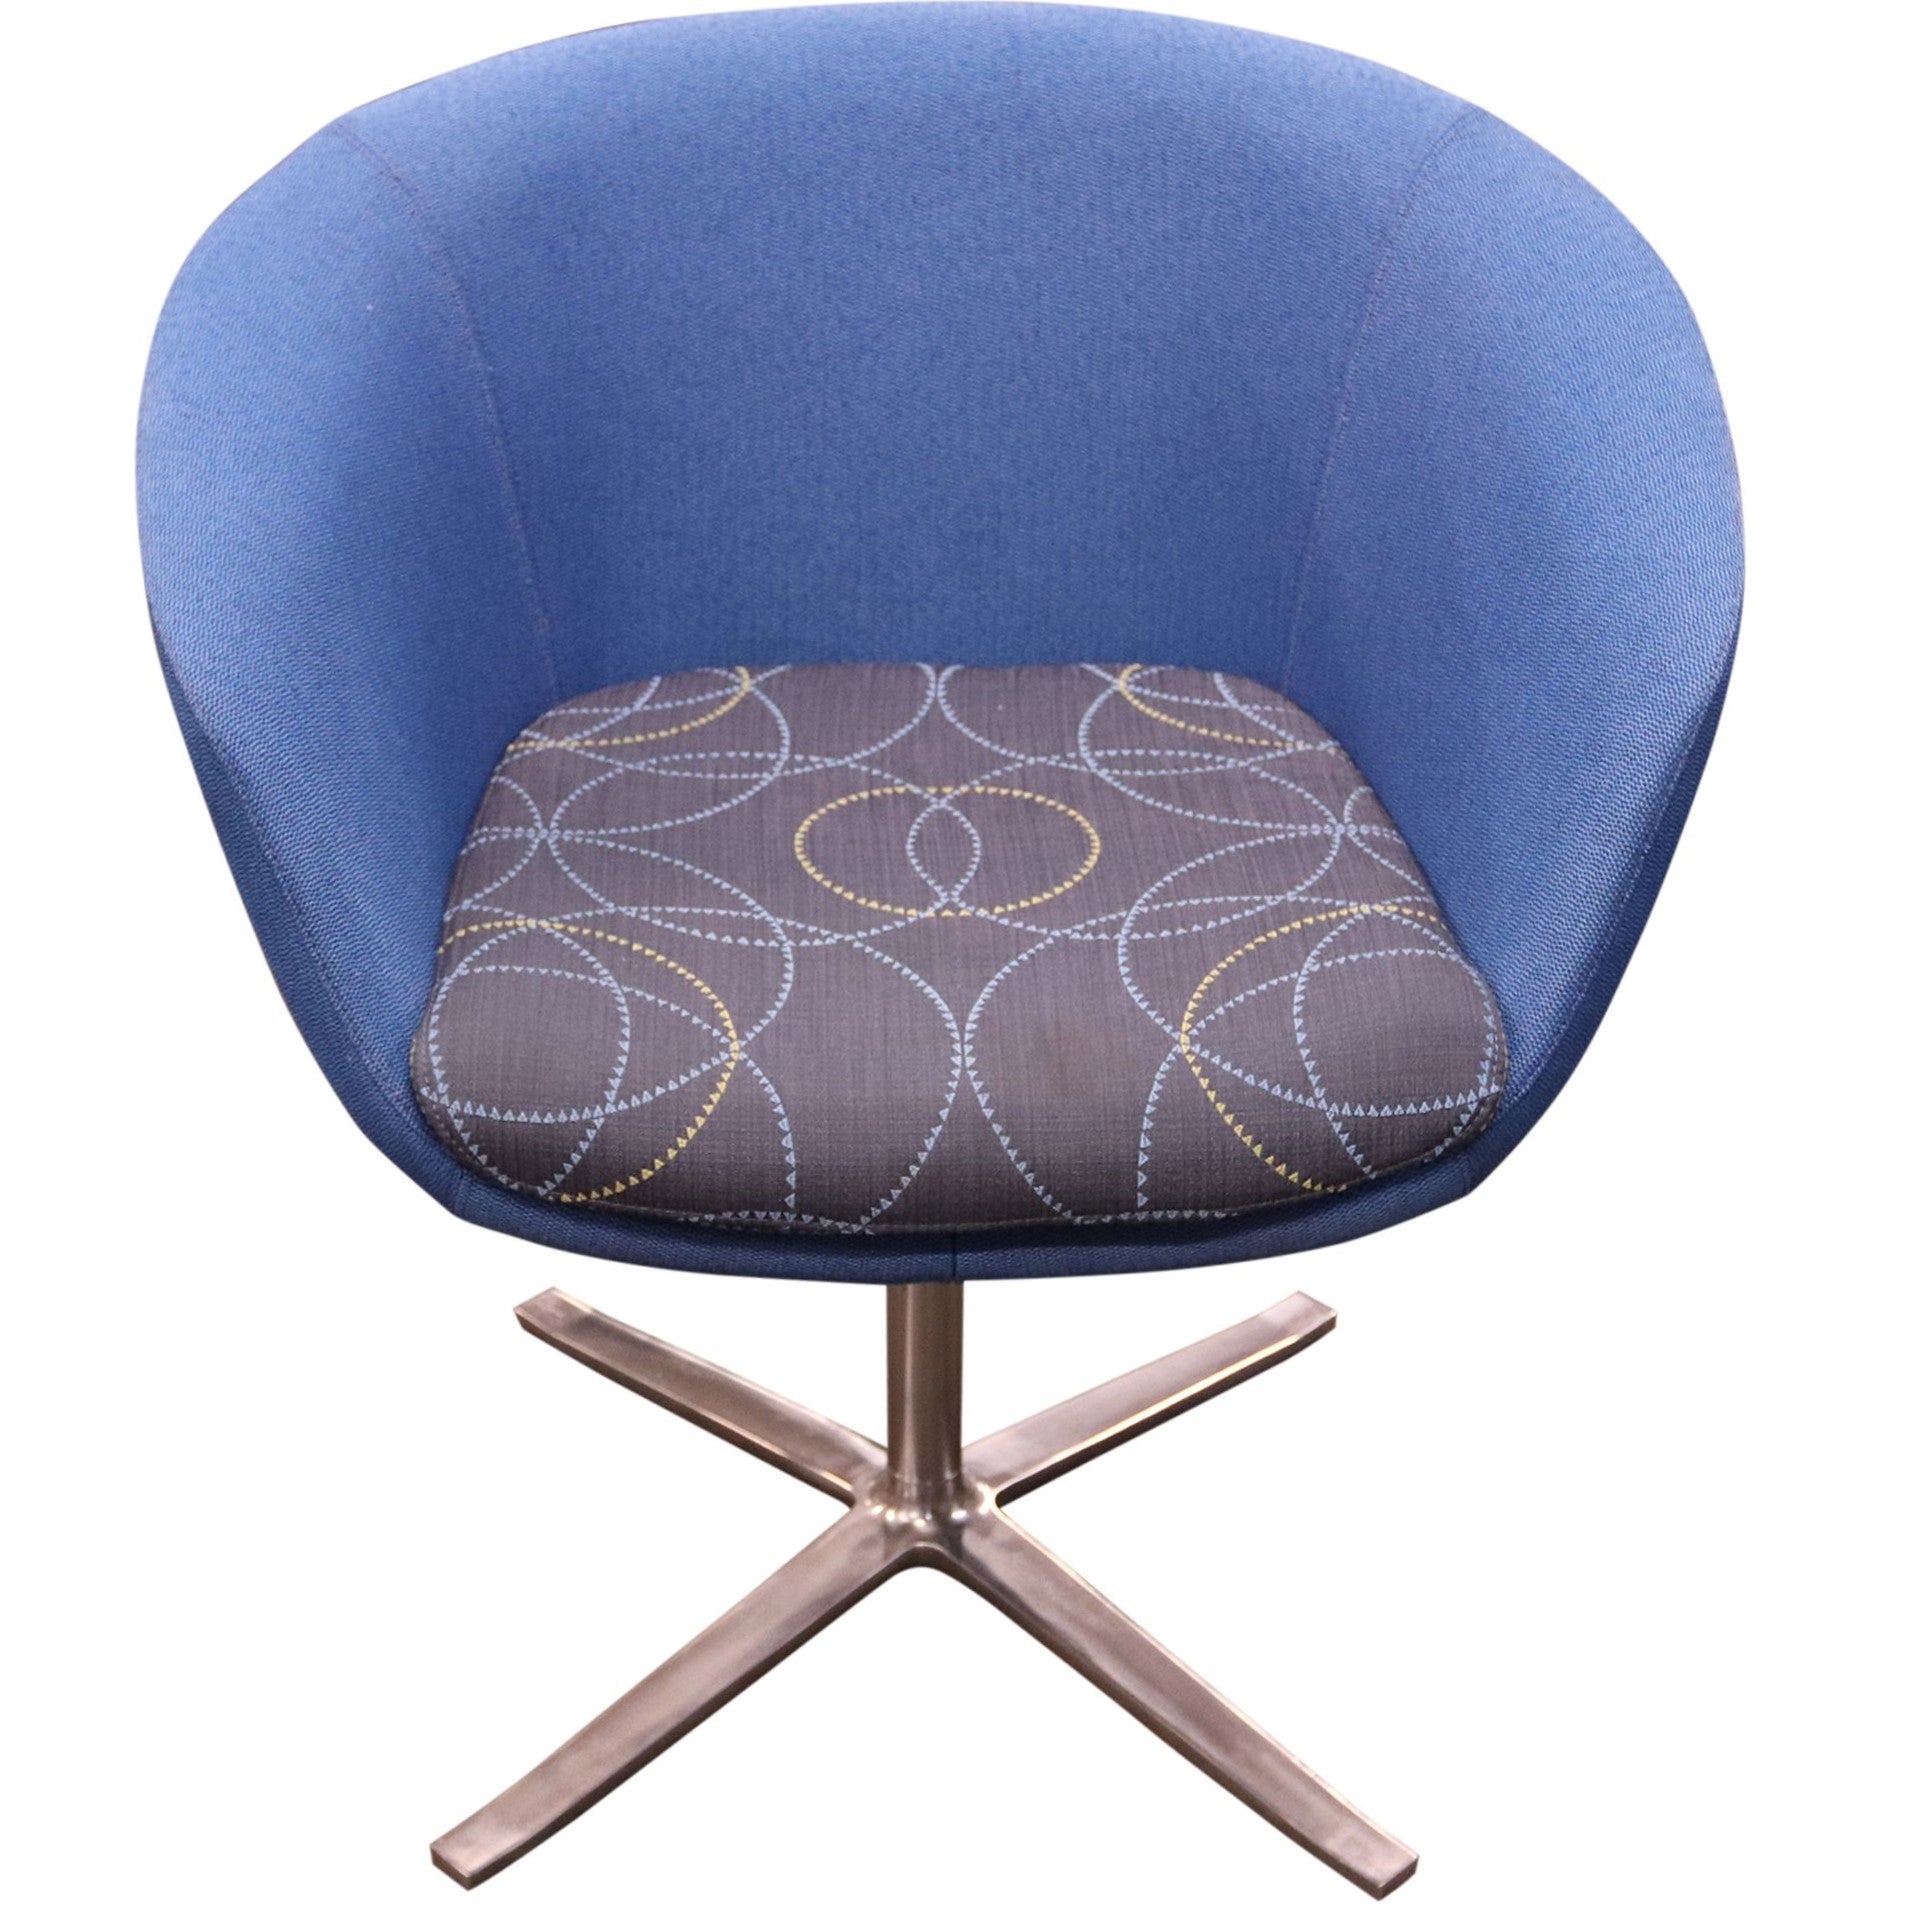 Coalesse Bob Guest Chair, Blue - Preowned